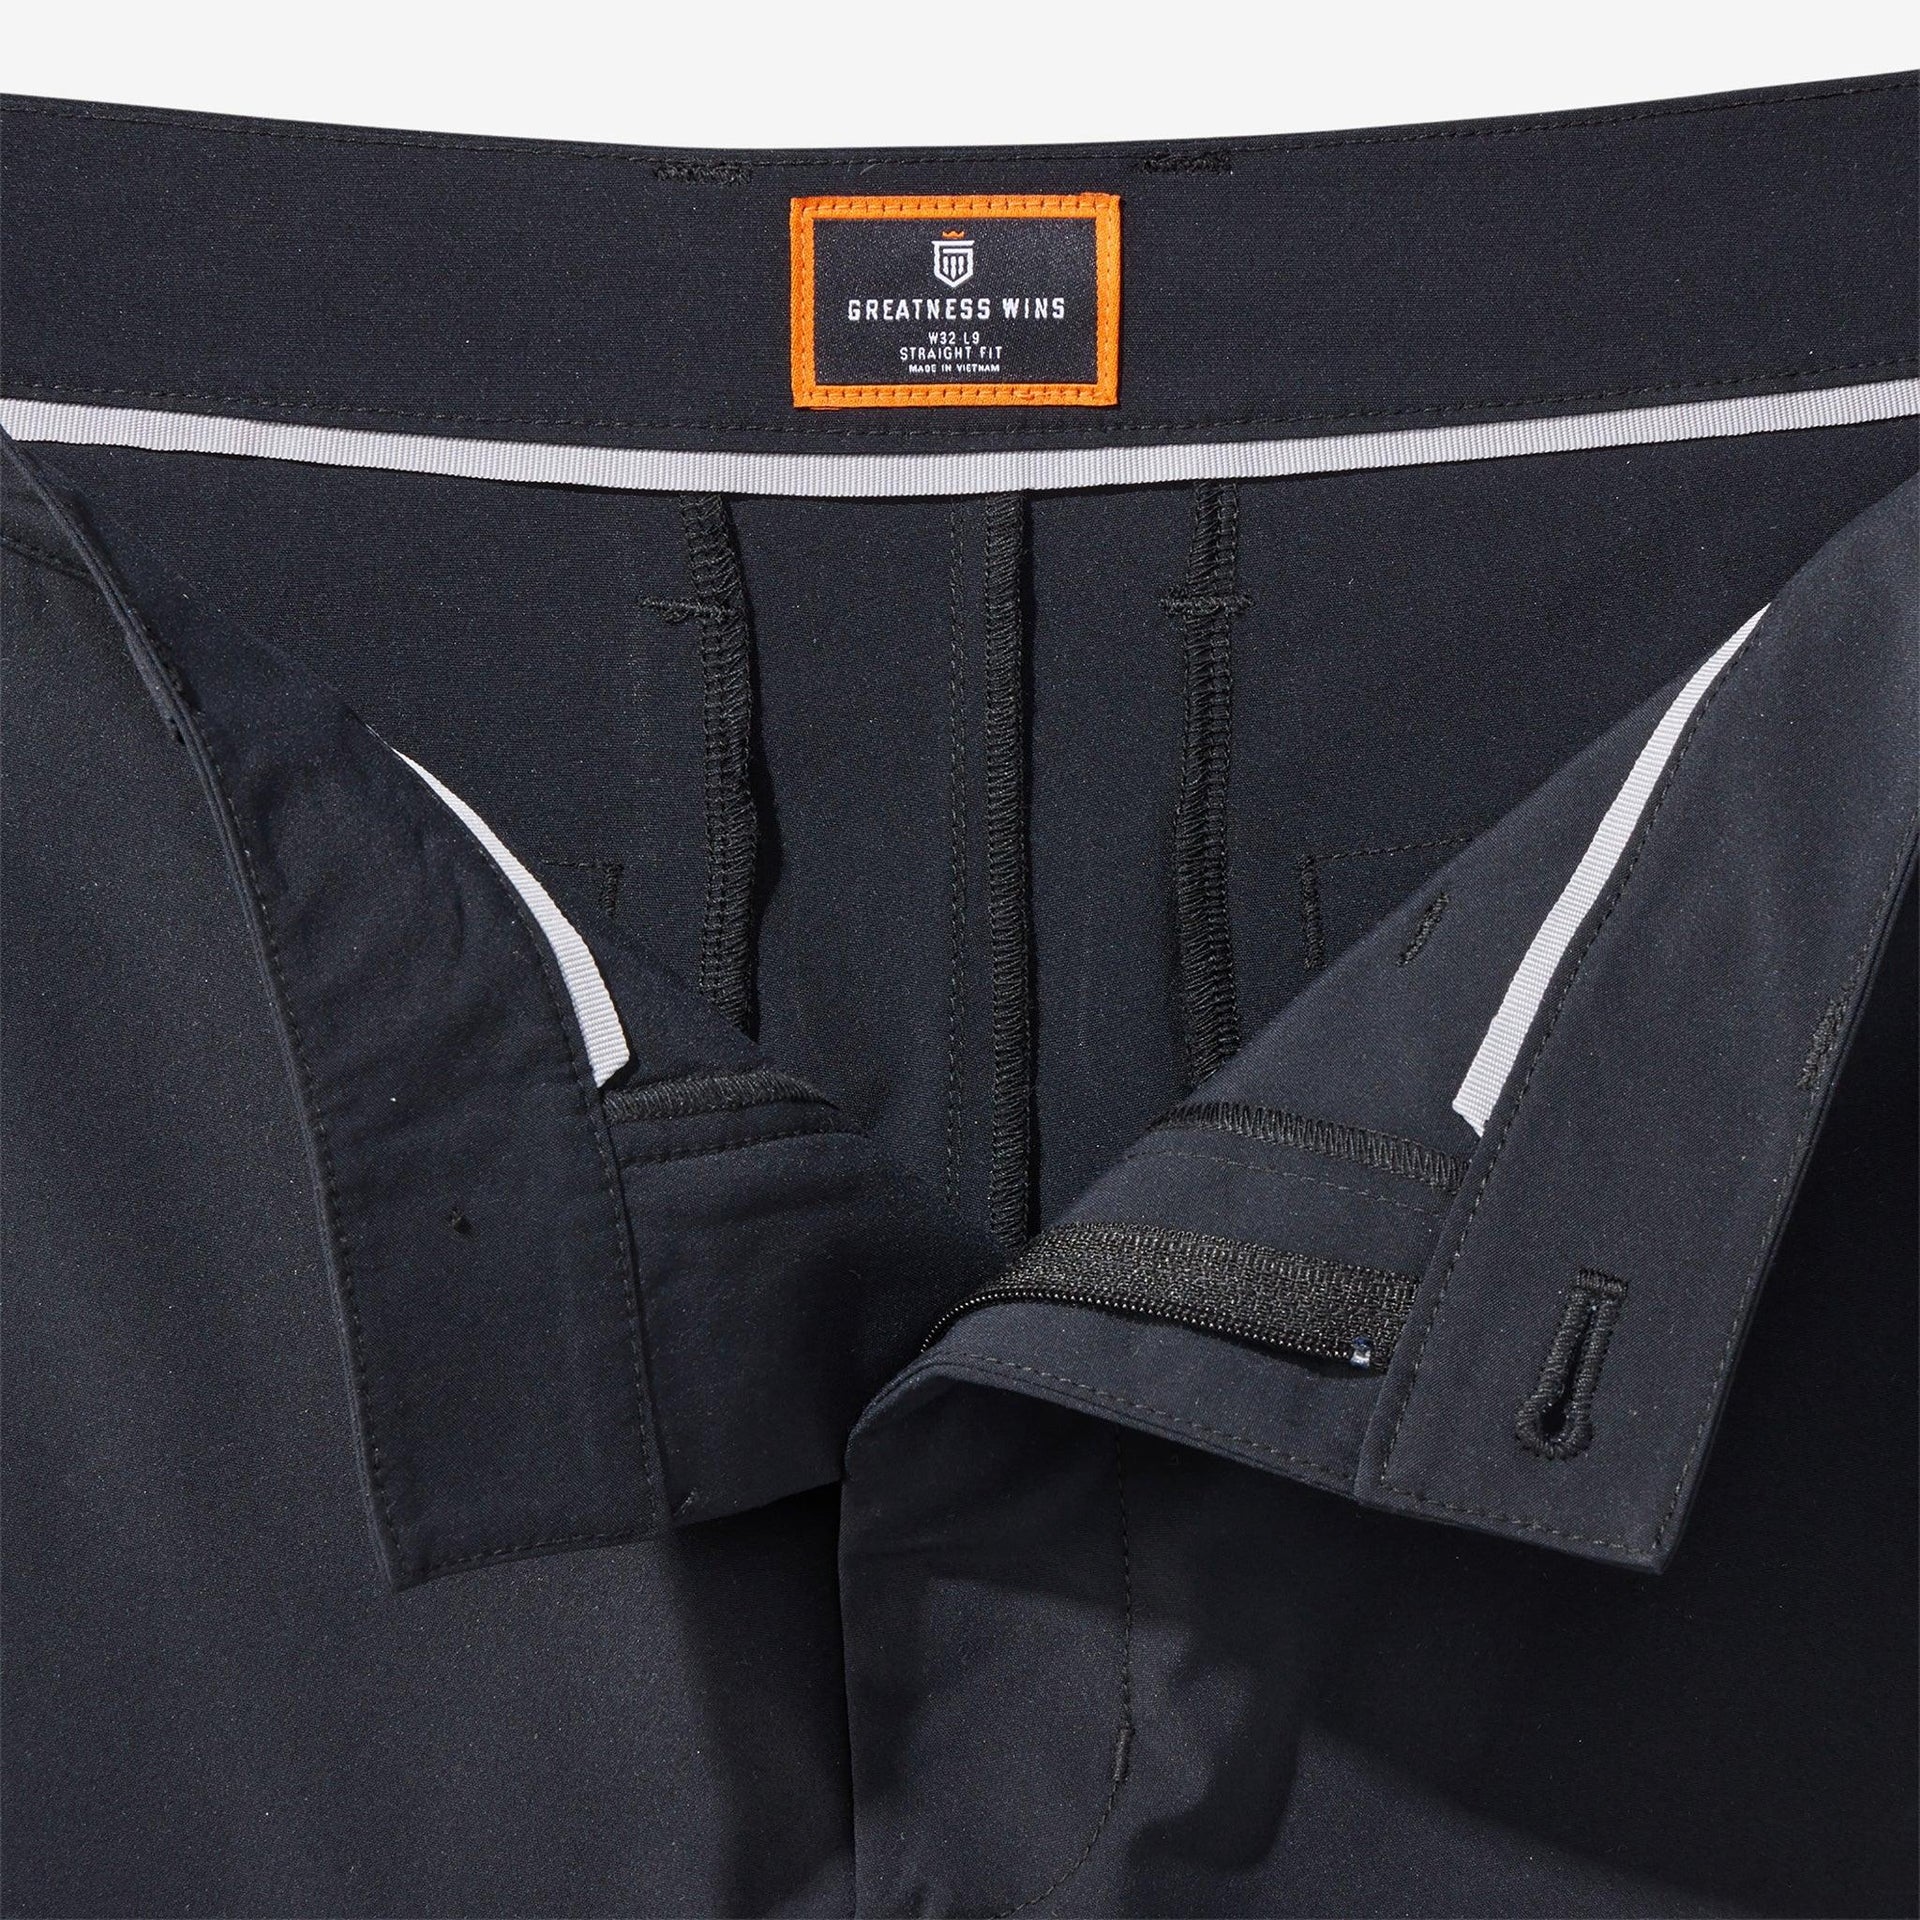 clubhouse pant Black 34x30